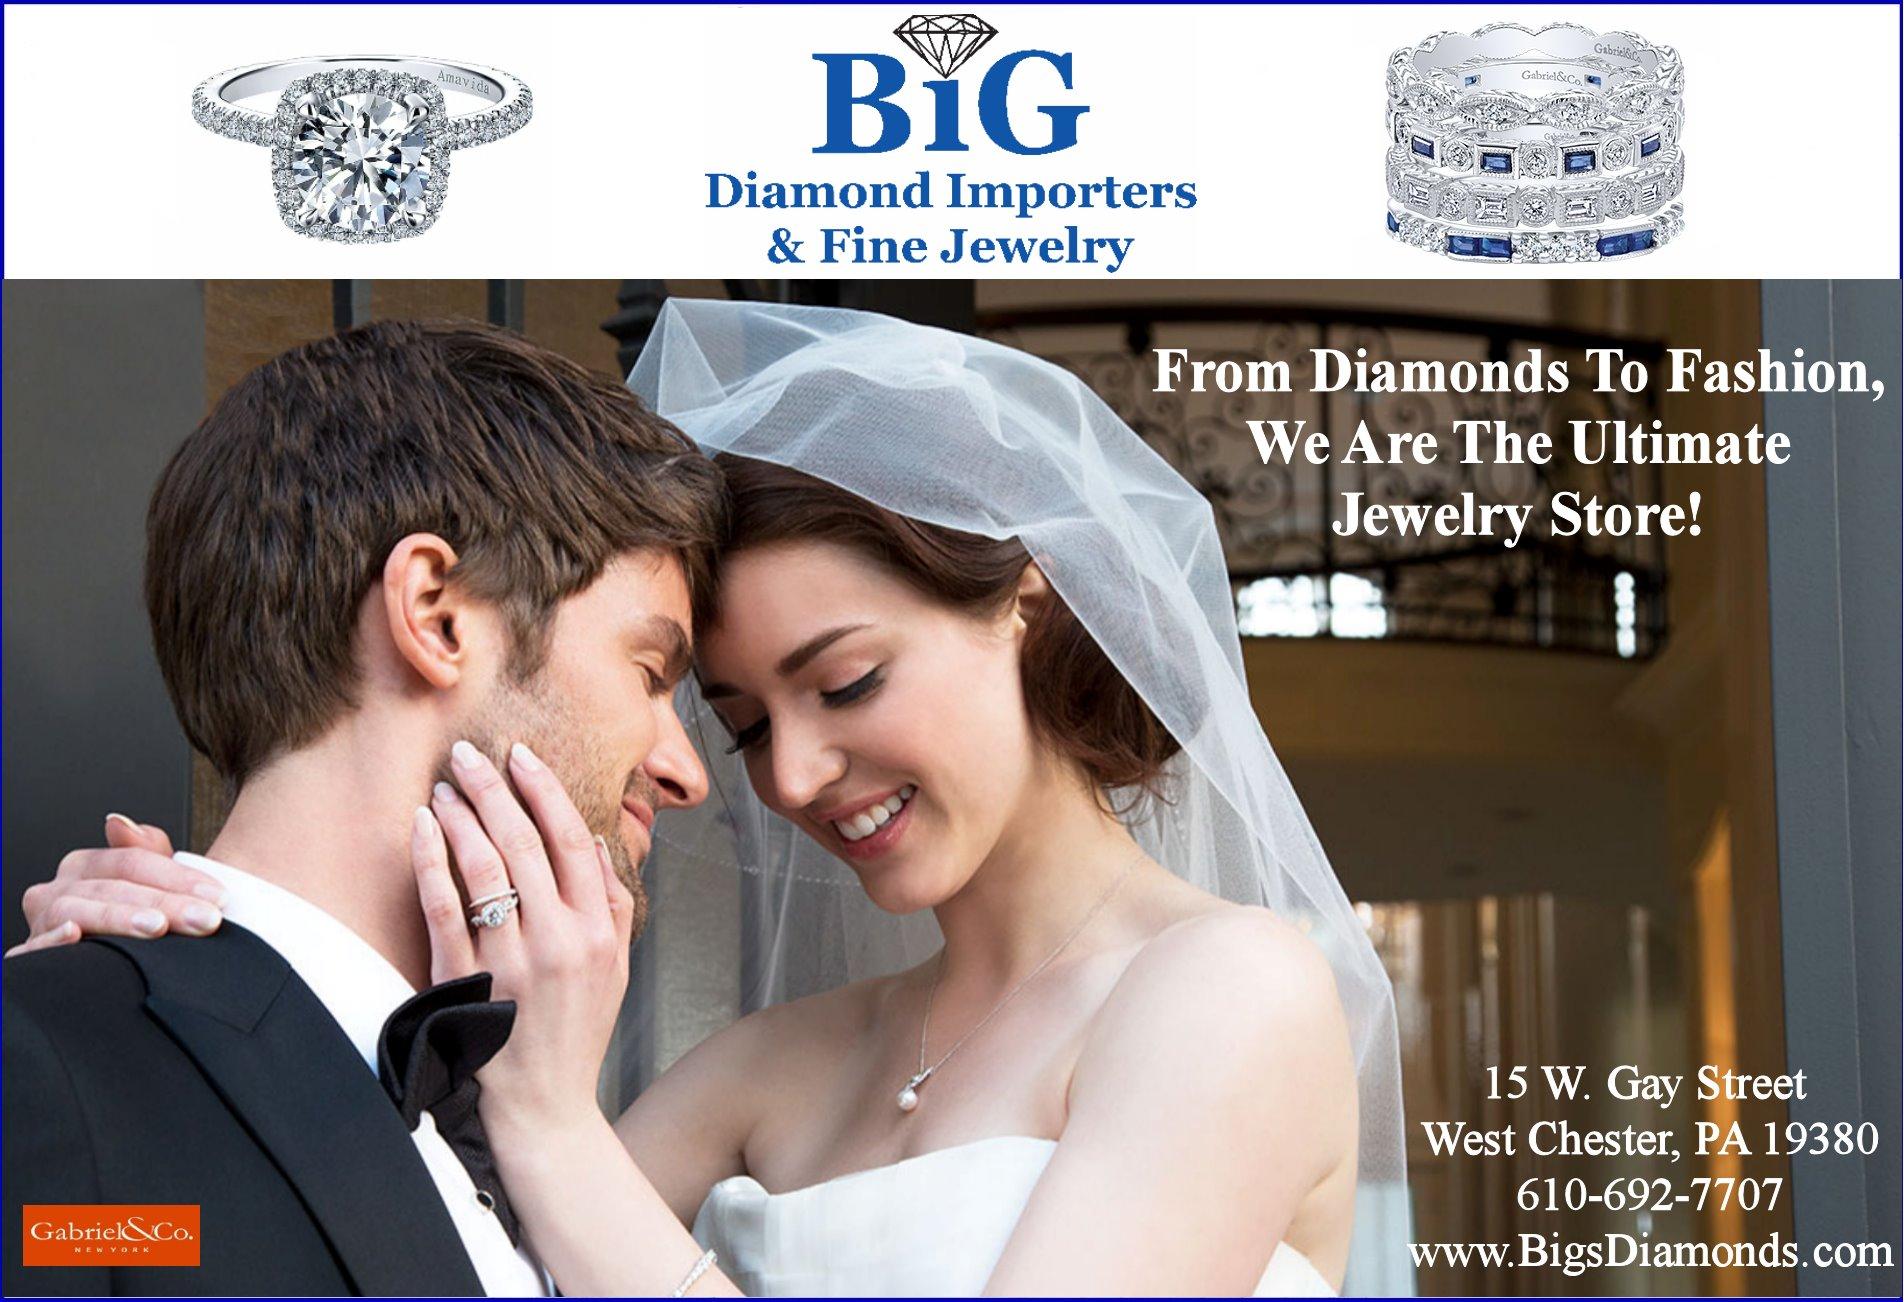 From Diamonds To Fashion - We are the Ultimate Jewelry Store!